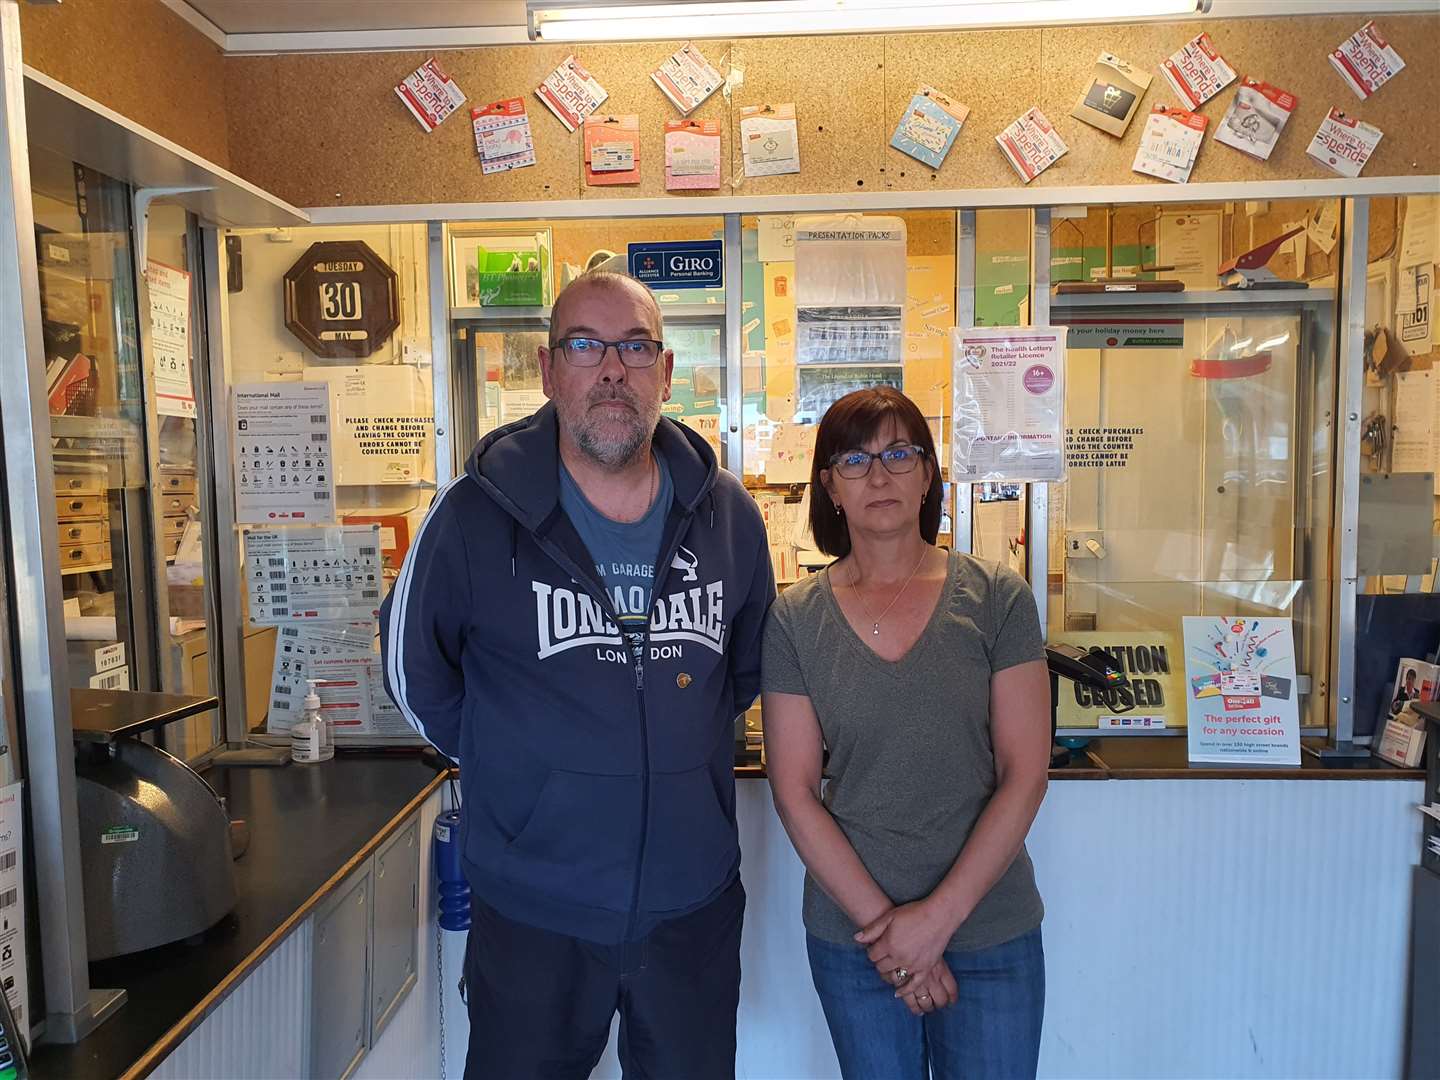 Fraser and Maria Lindsay at the post office counter in Dersingham